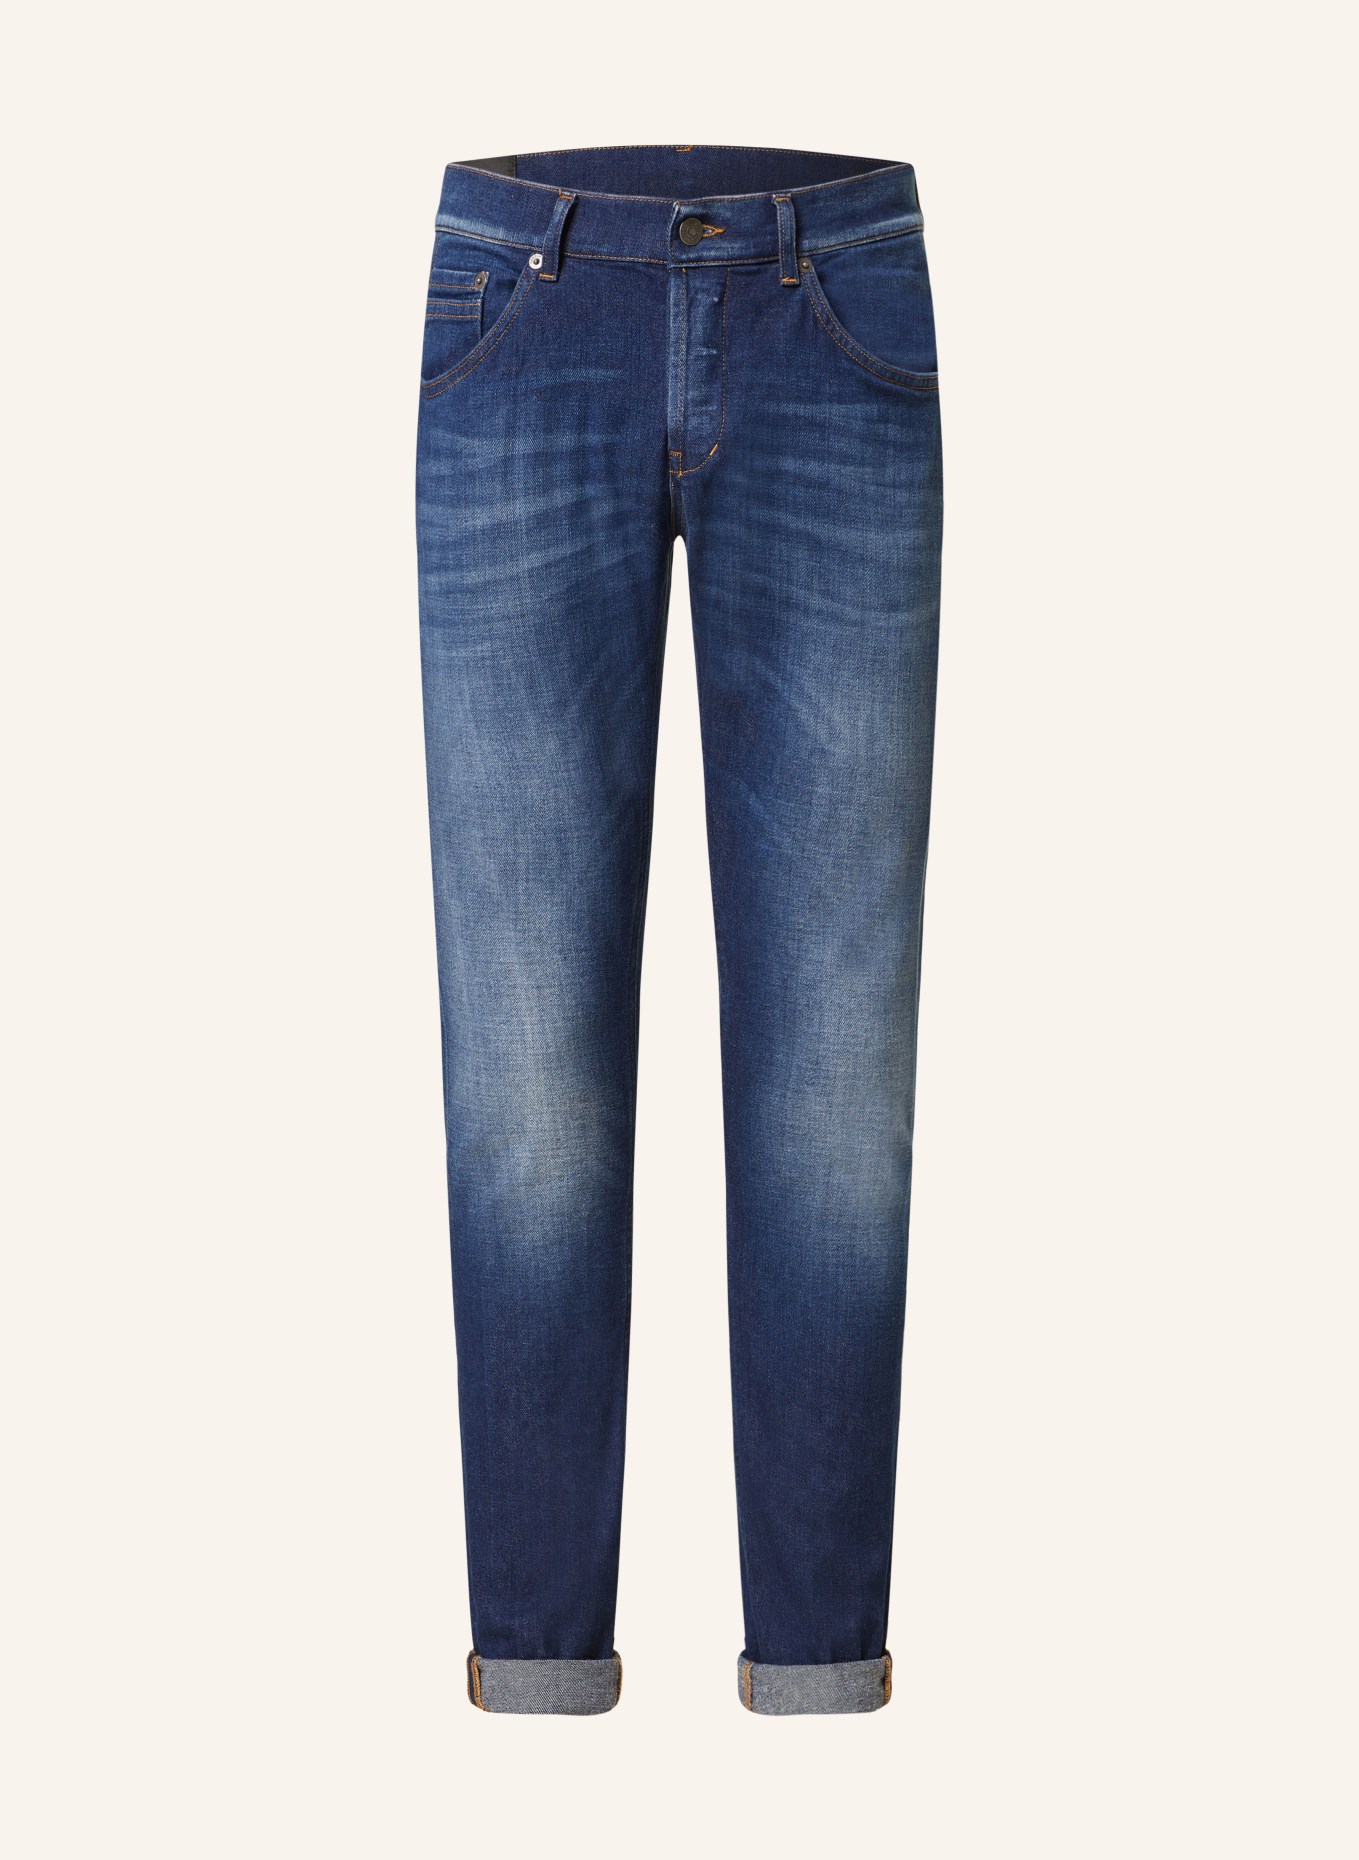 Dondup Jeans RITCHIE Extra Slim Fit, Farbe: 800 MID BLUE (Bild 1)